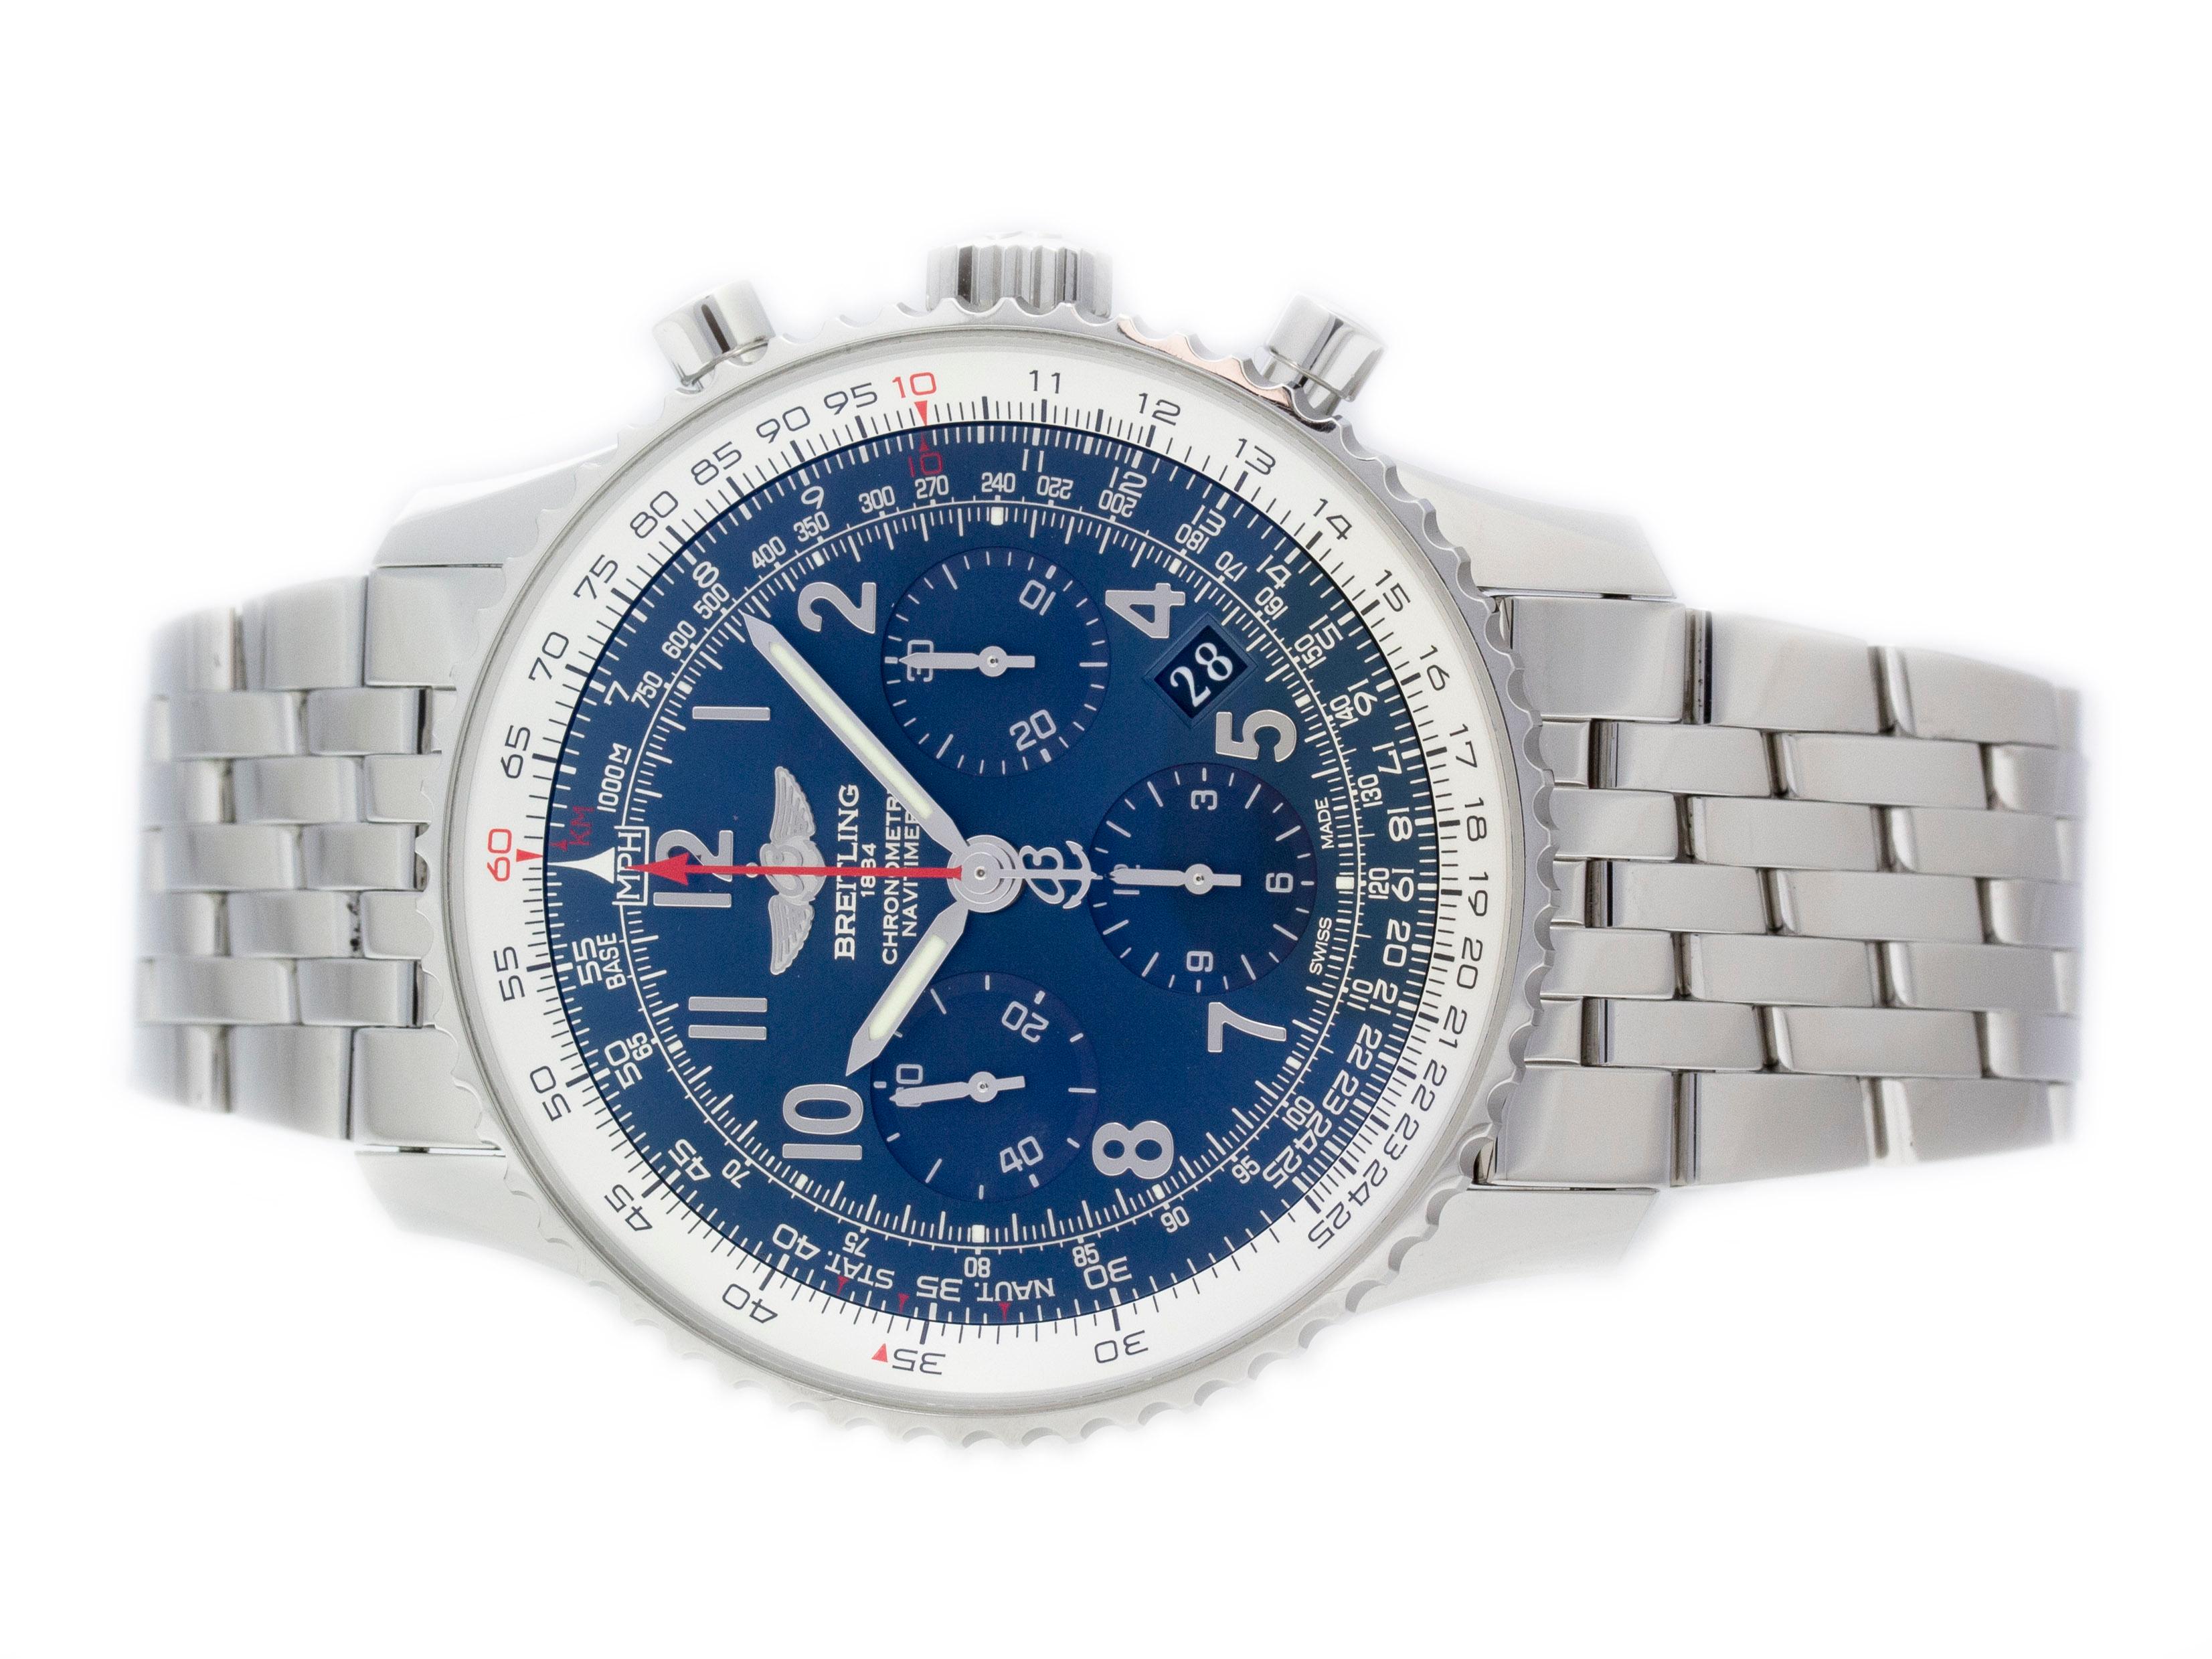 Stainless steel Breitling Navitimer 01 AB0121C4/C920-447A watch, water resistant to 30m, with date, chronograph, and bracelet. Comes with Breitling Box, COSC & Limited Edition Certificates.

BAND MATERIAL	
Stainless Steel

CASE DIAMETER	
43mm

CASE